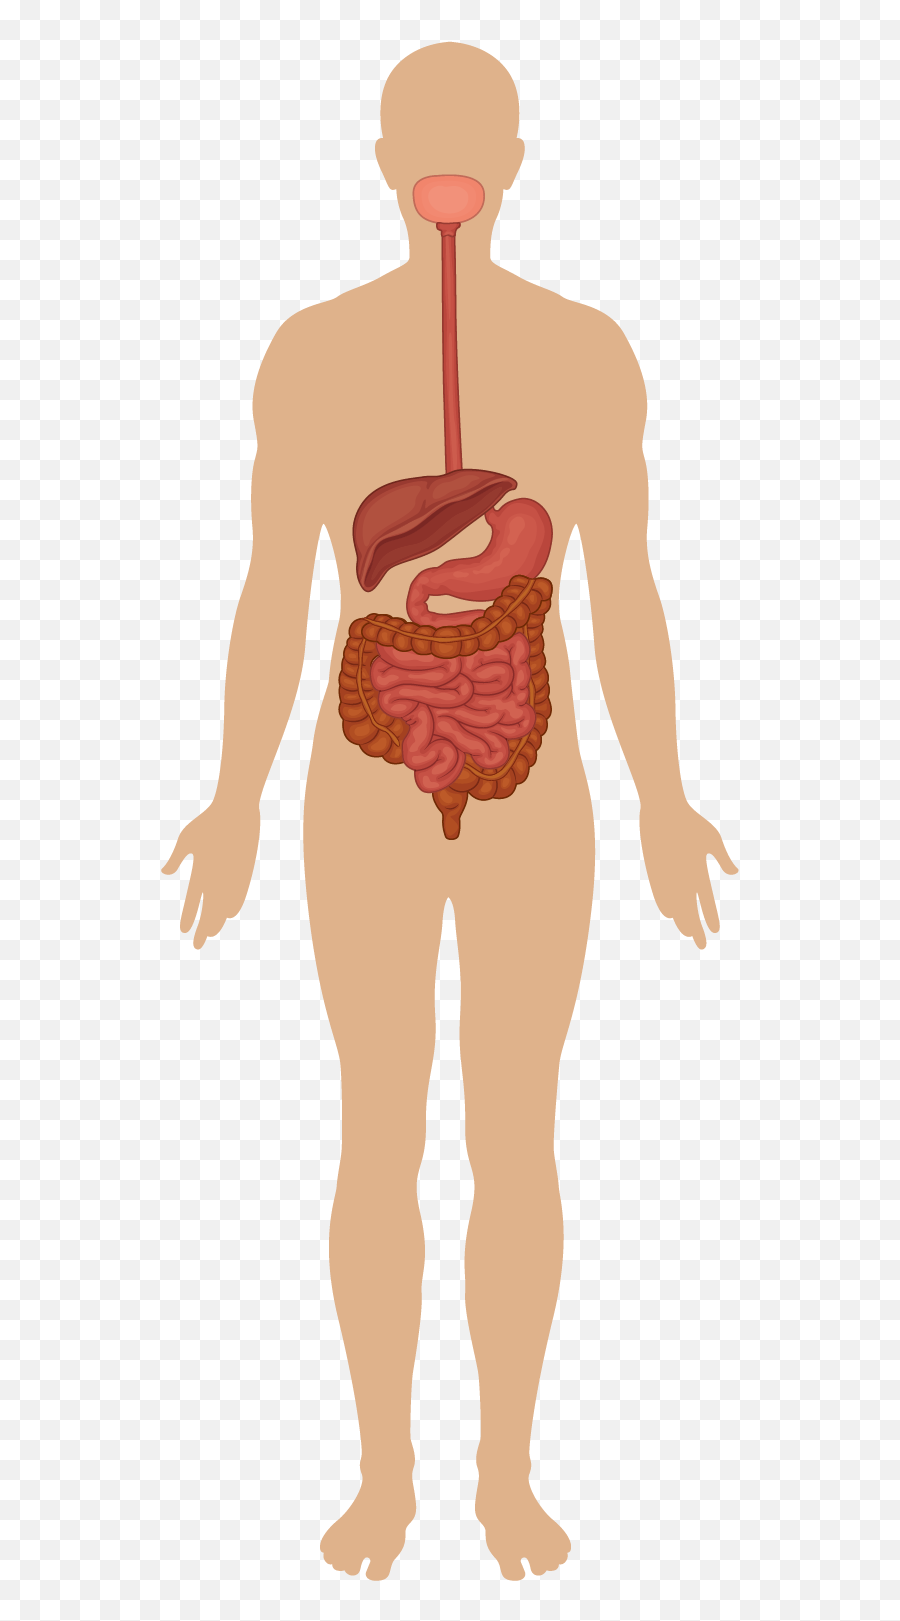 The Digestive System - Human Body Systems Full Size Png Major Organ System Of The Human Body,Digestive System Png